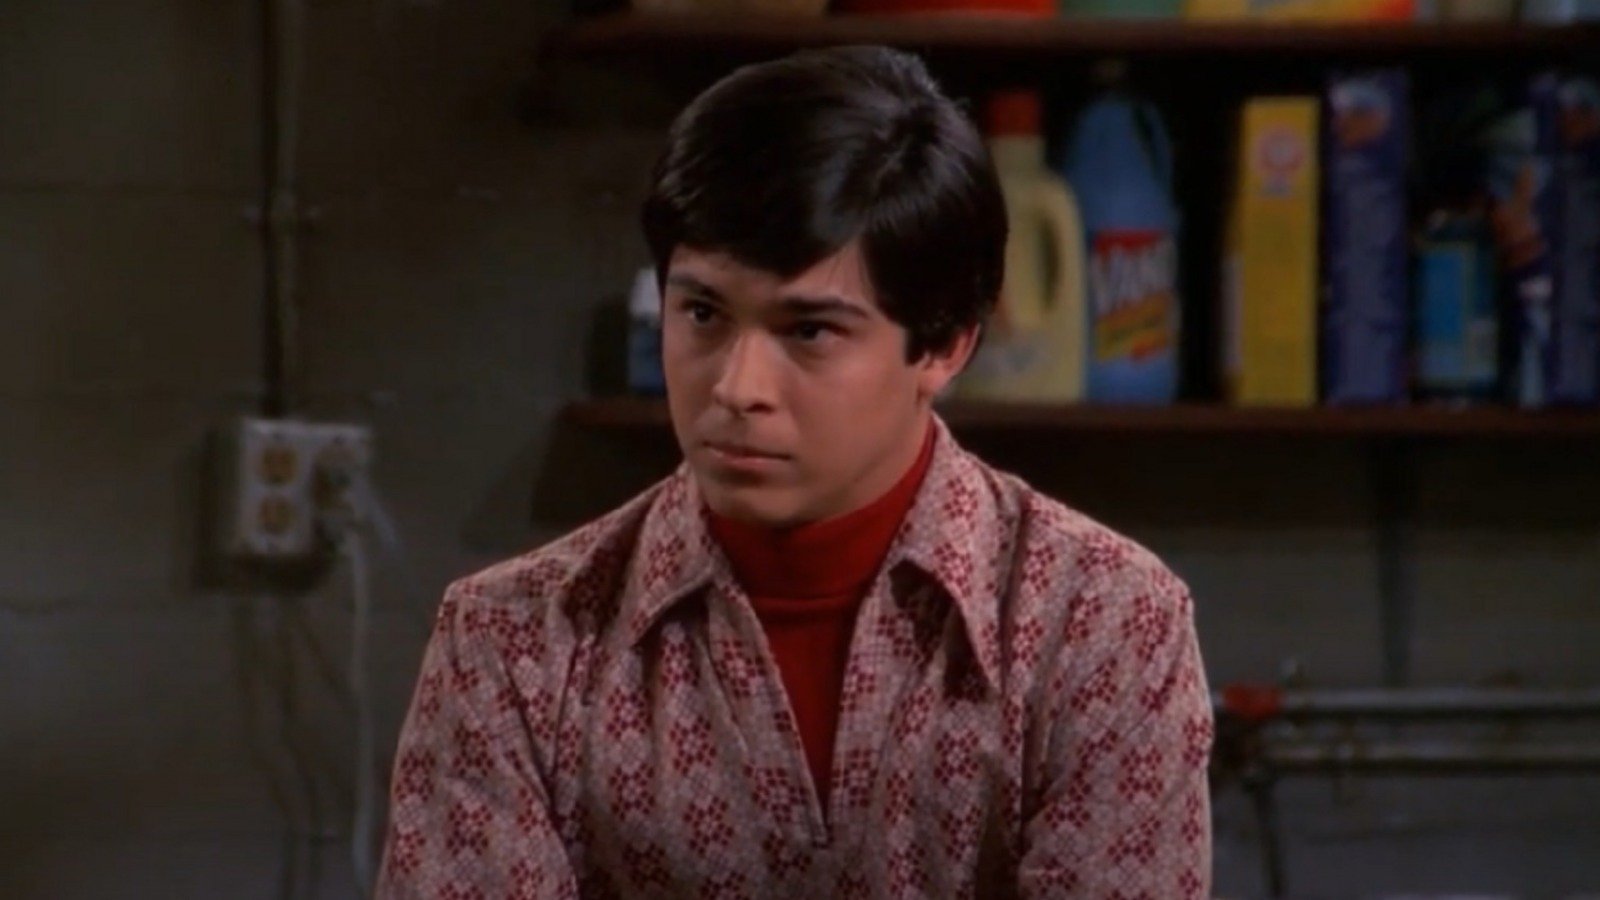 Fez From That 70s Show Is Unrecognizably Gorgeous In Real Life - Nicki Swift